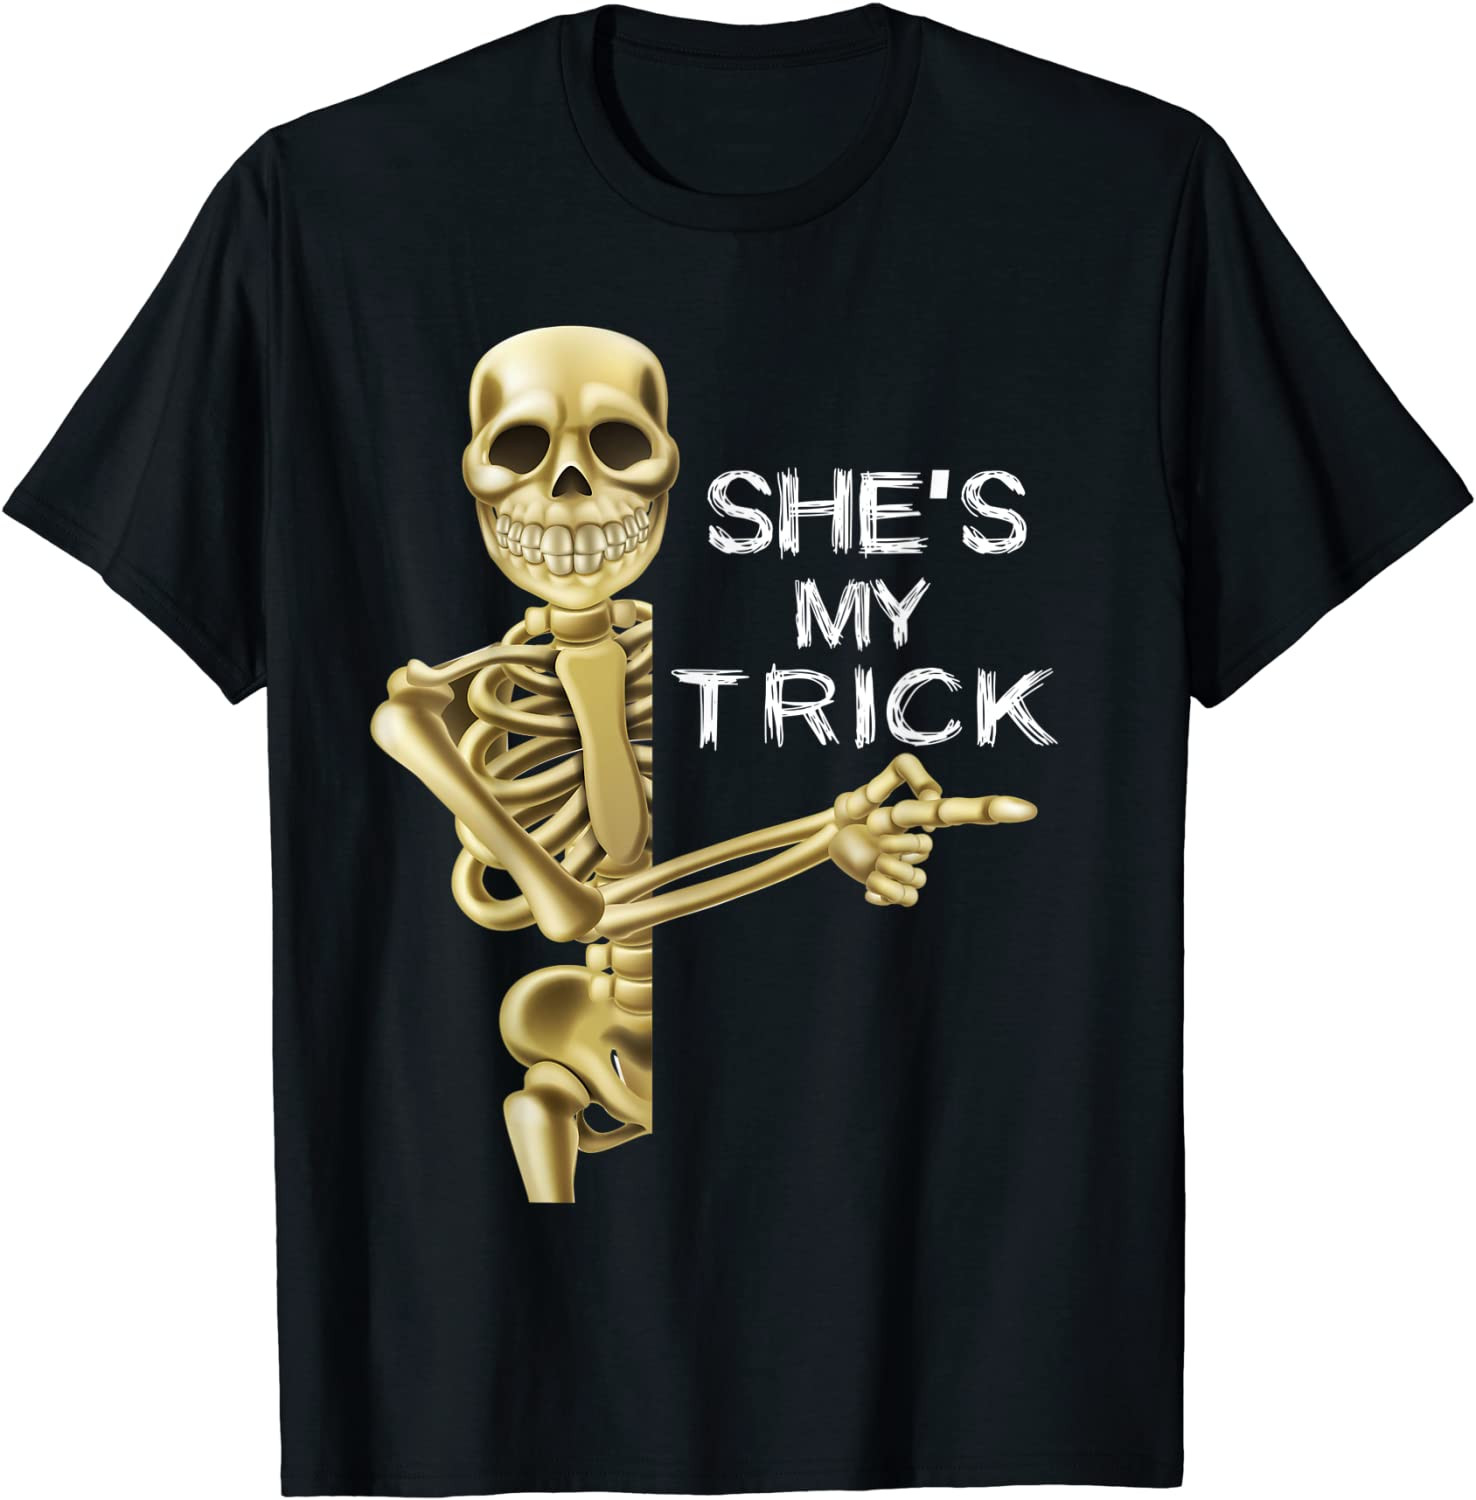 Halloween Shes My Trick T-Shirt